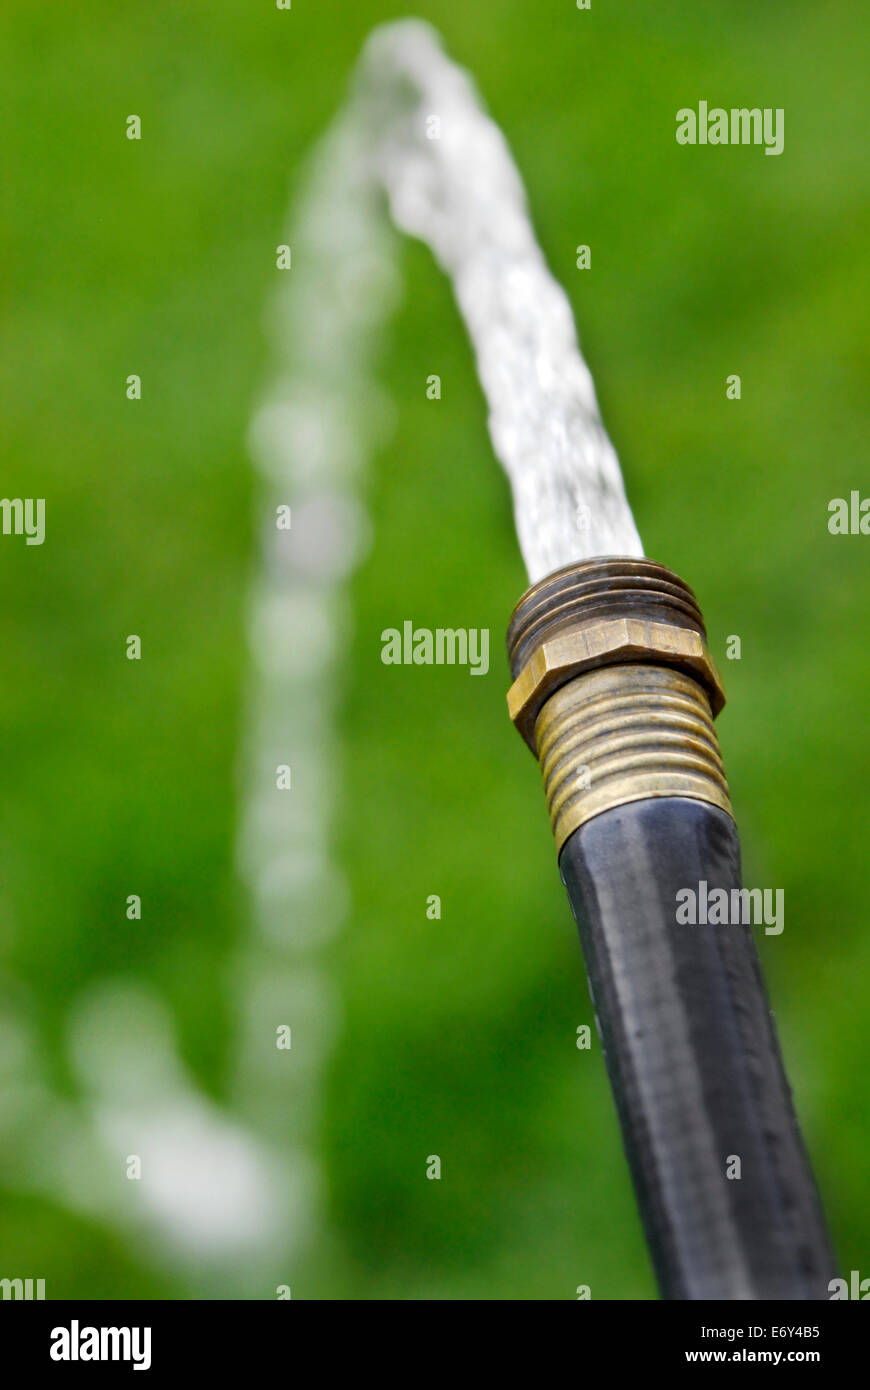 Detail of black hose squirting shooting fresh water on green grass lawn Stock Photo